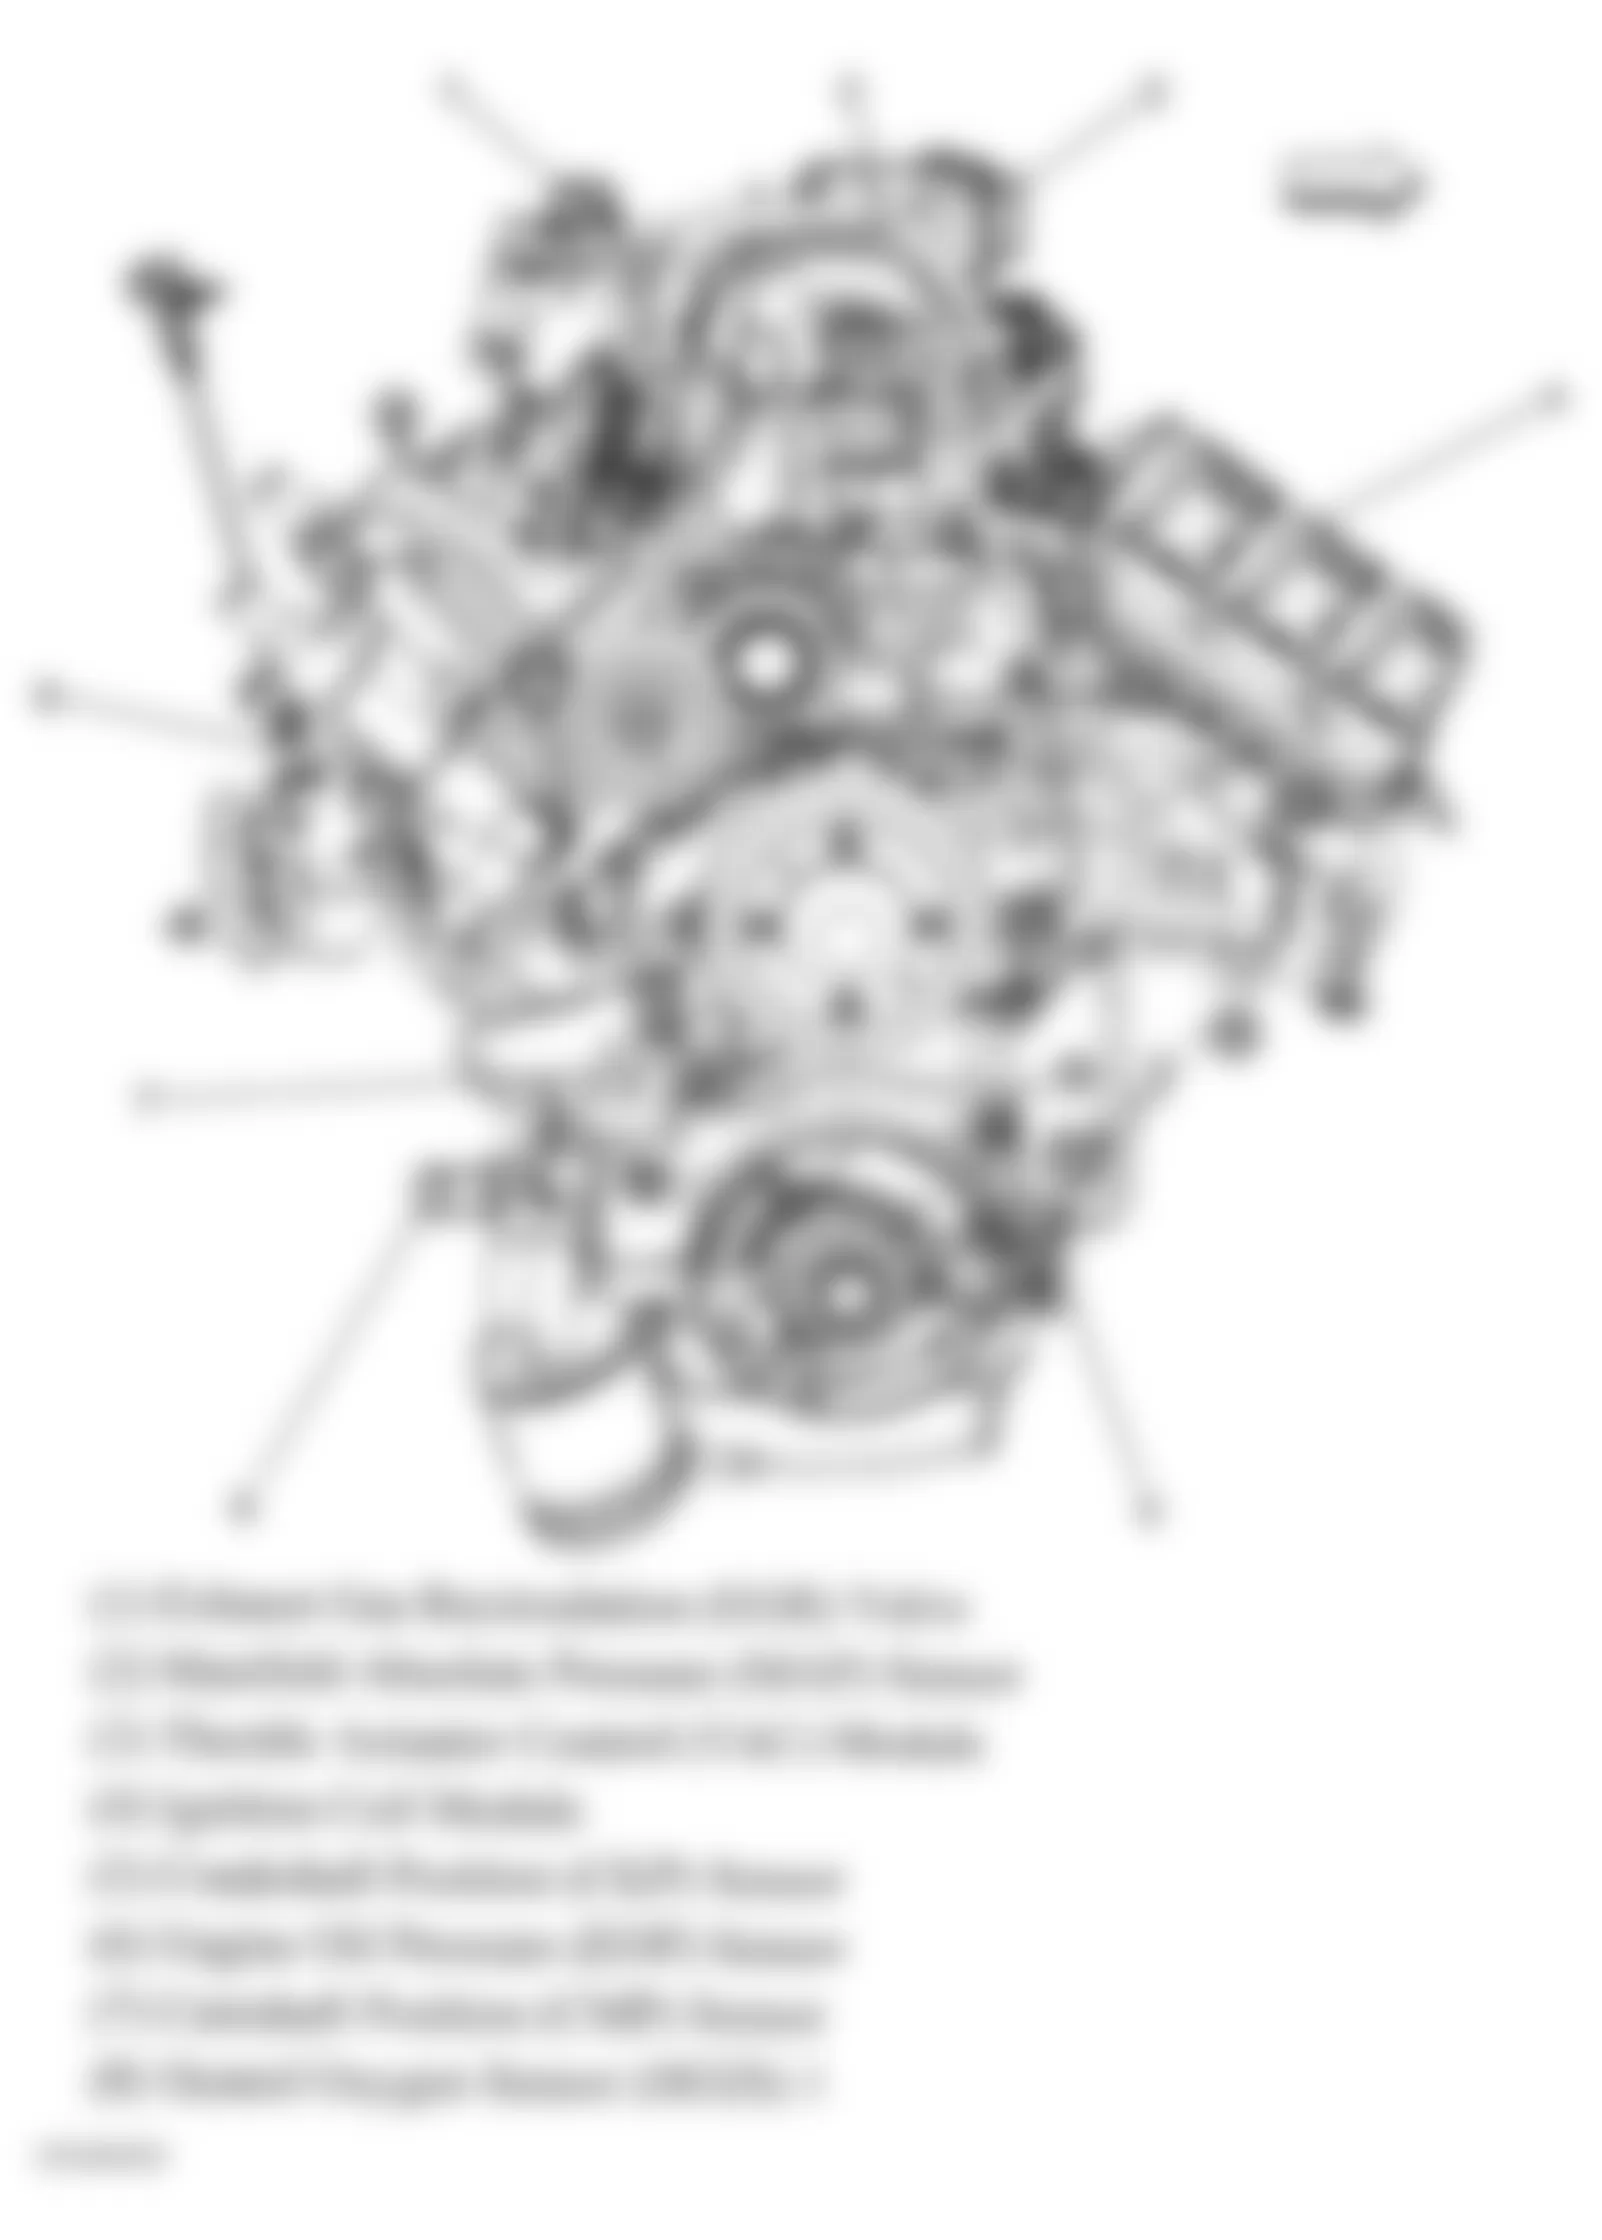 Buick LaCrosse CX 2005 - Component Locations -  Front Of Engine (3.8L)